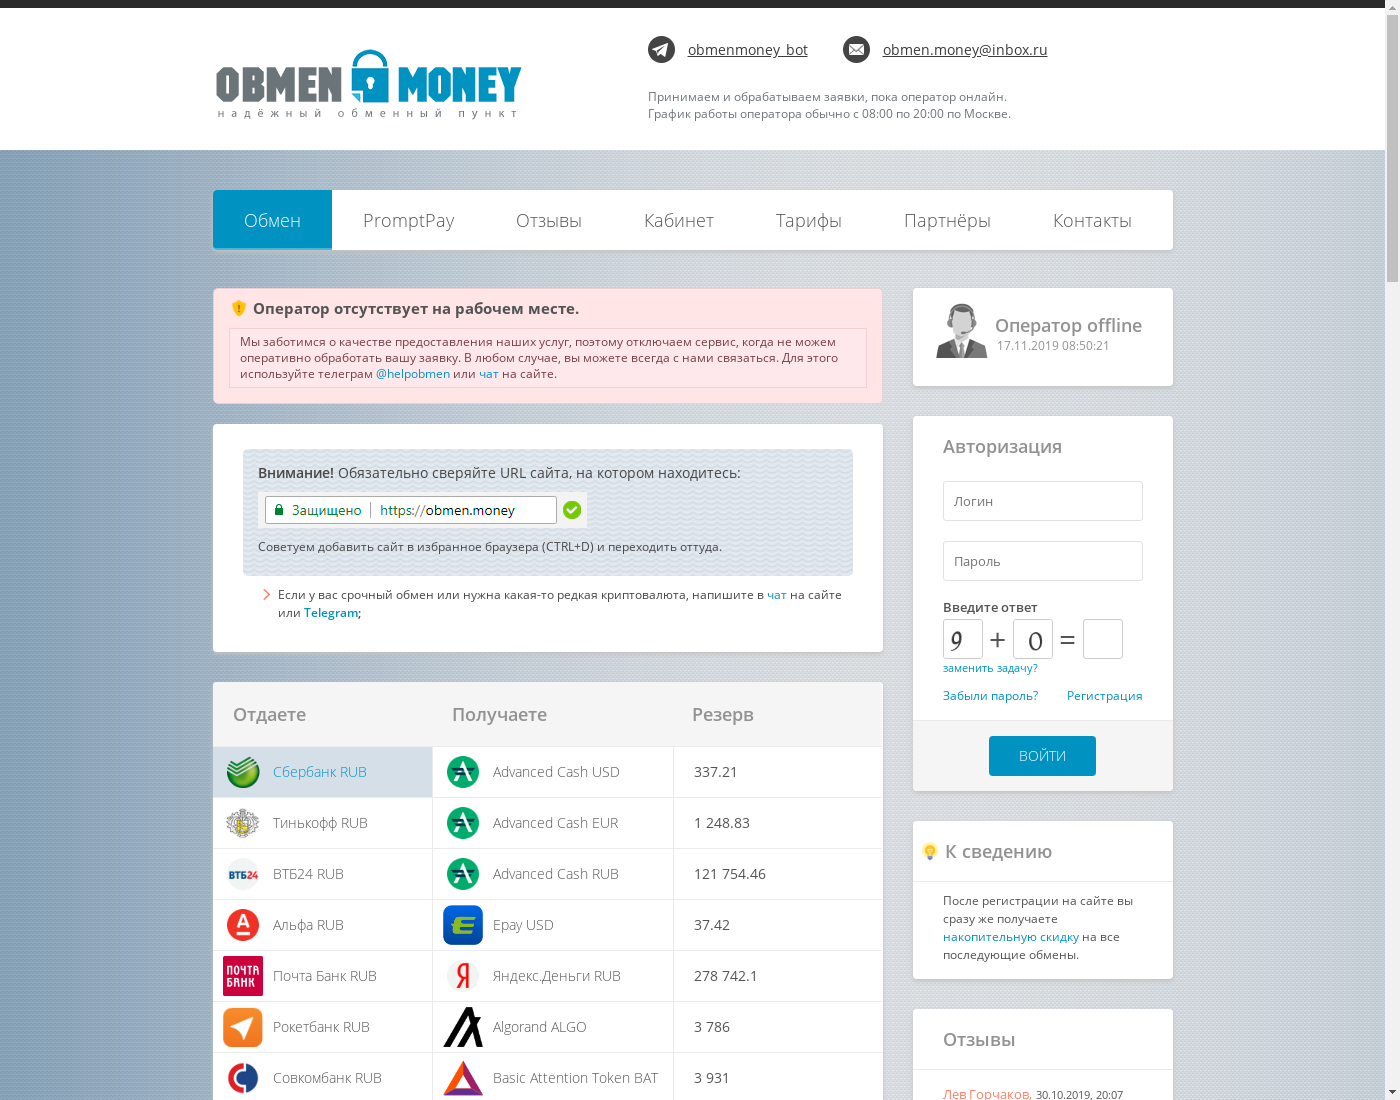 ObmenMoney user interface: the home page in English